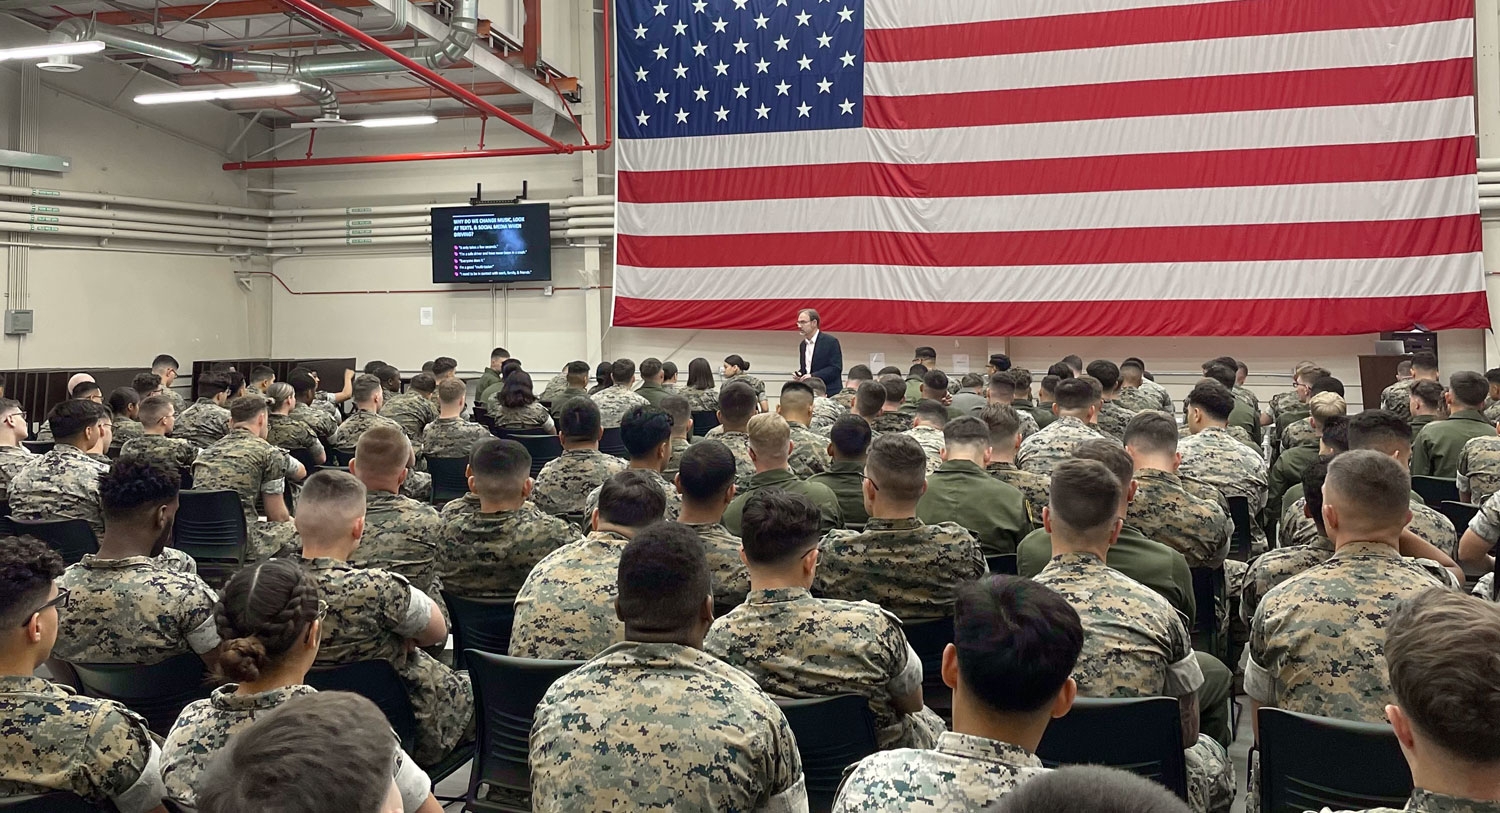 Anapol Weiss Shares Vital Road Safety Message with Marines at Camp Pendleton